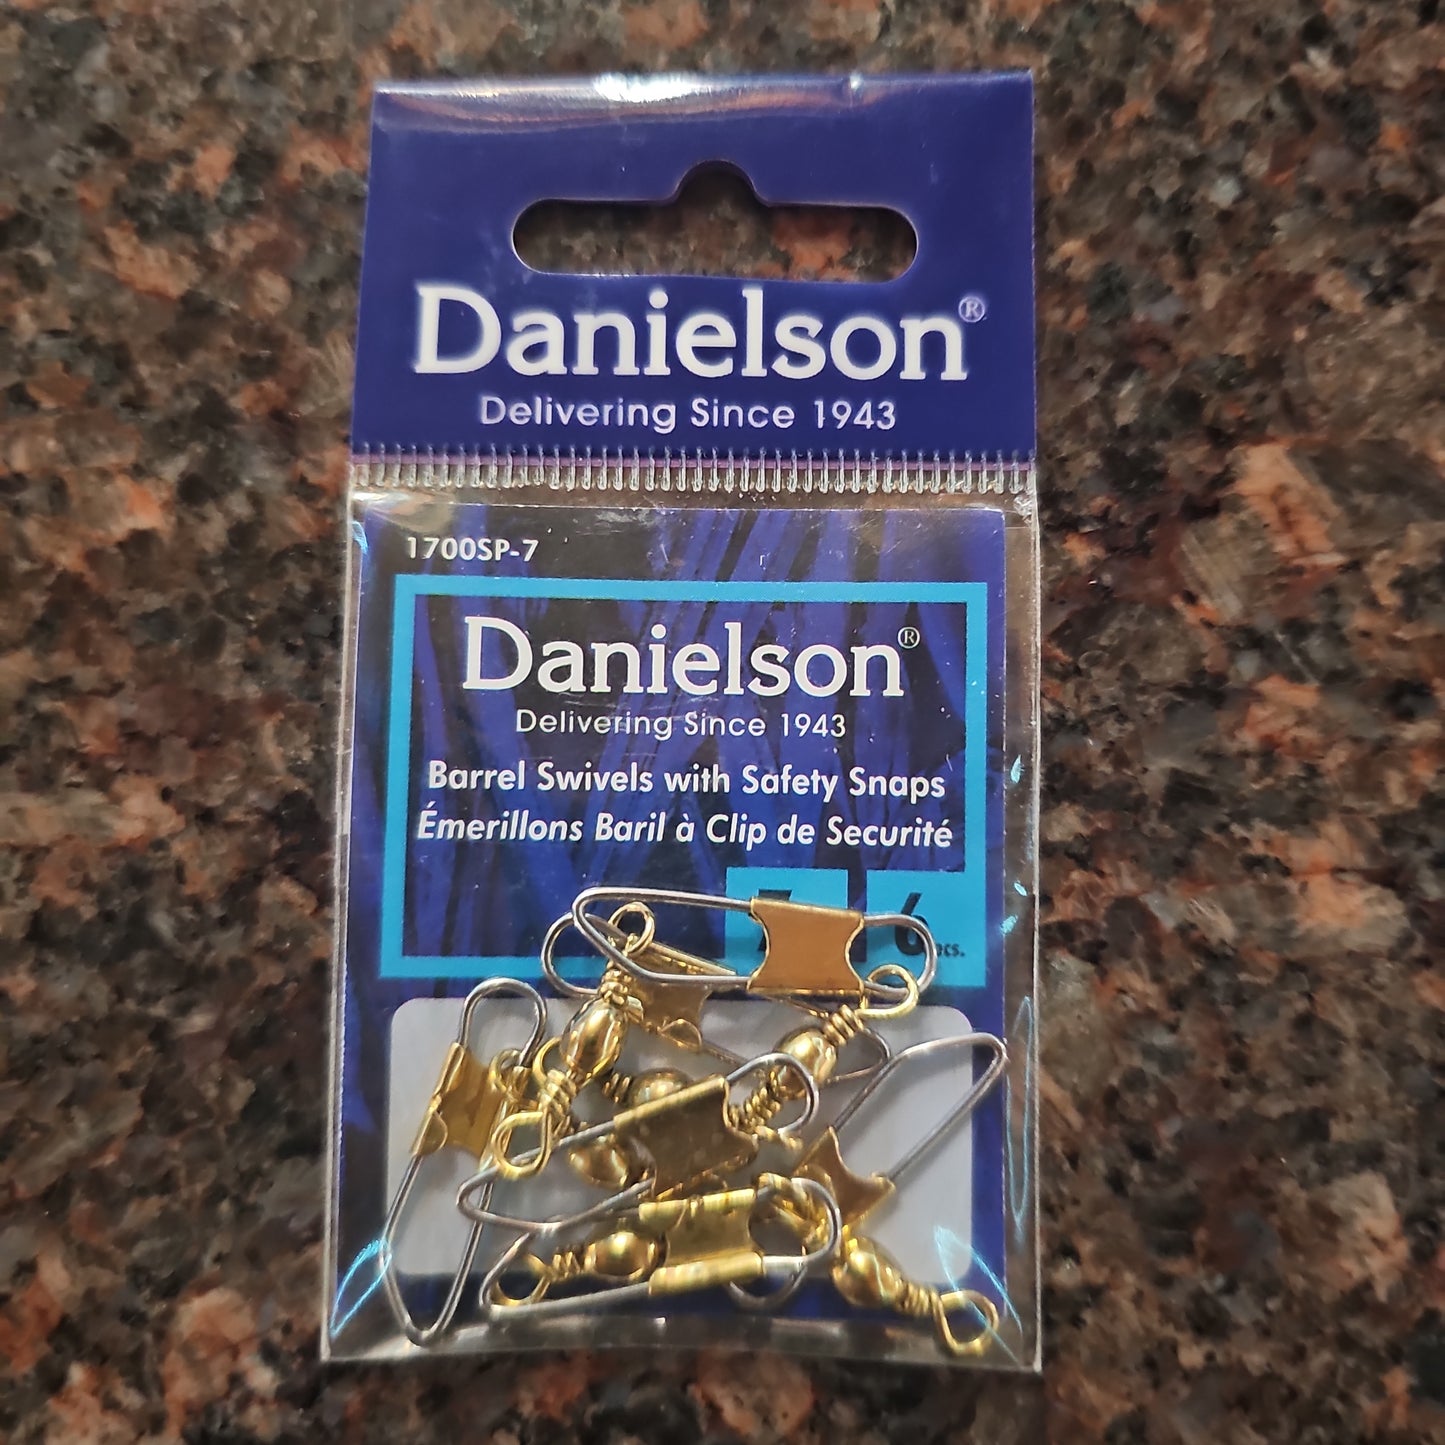 Danielson Swivels Barrel with Safety Snap